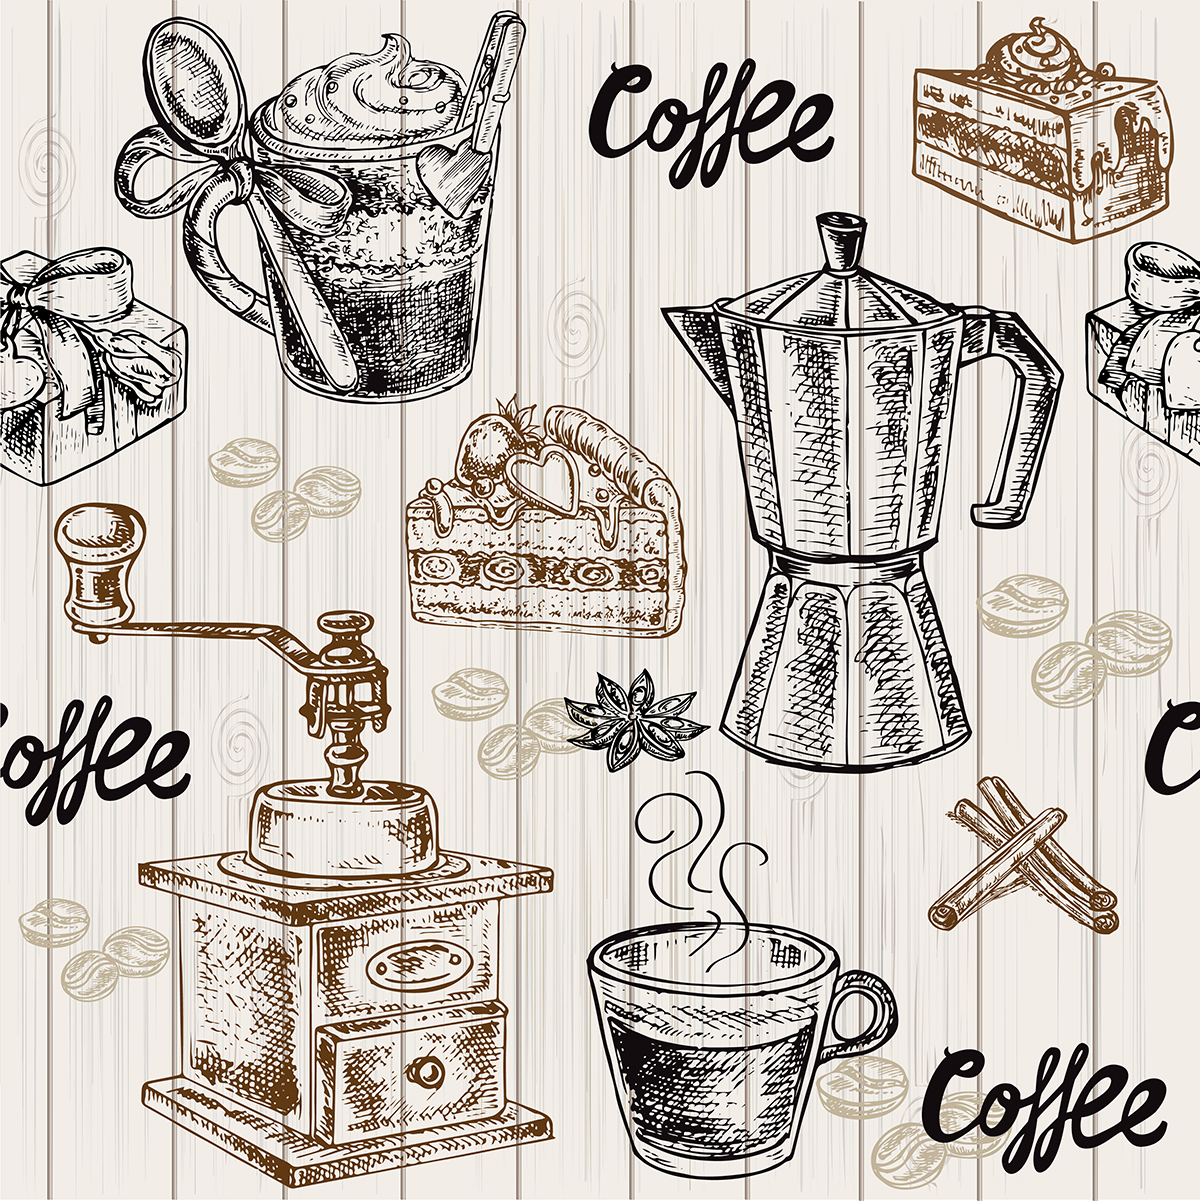 A drawing of coffee and cakes